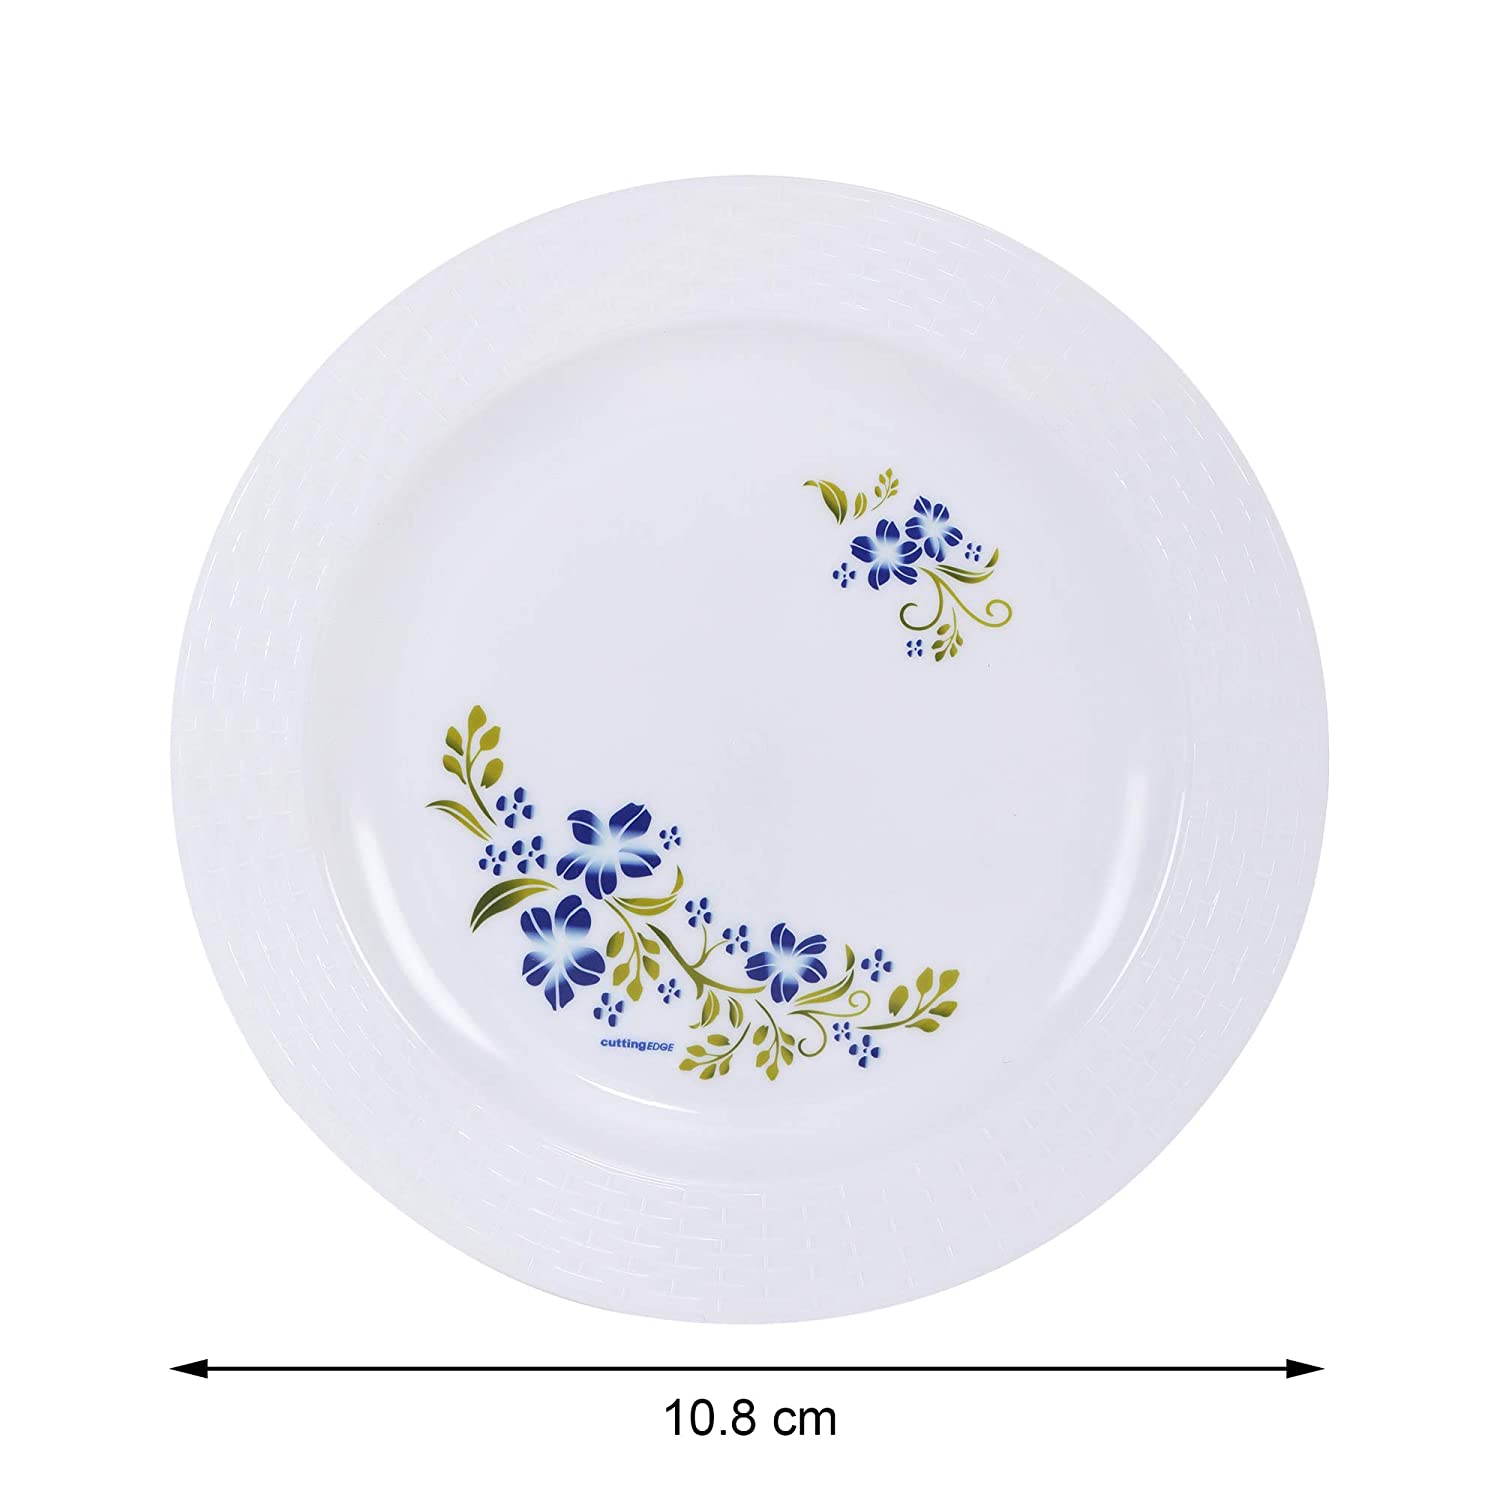 Cutting EDGE Round Colorful Set of Dinner Plates with Floral Printed Design for Families, Parties, Unbreakable, Kid Friendly, Microwave Safe, Dishwasher Safe